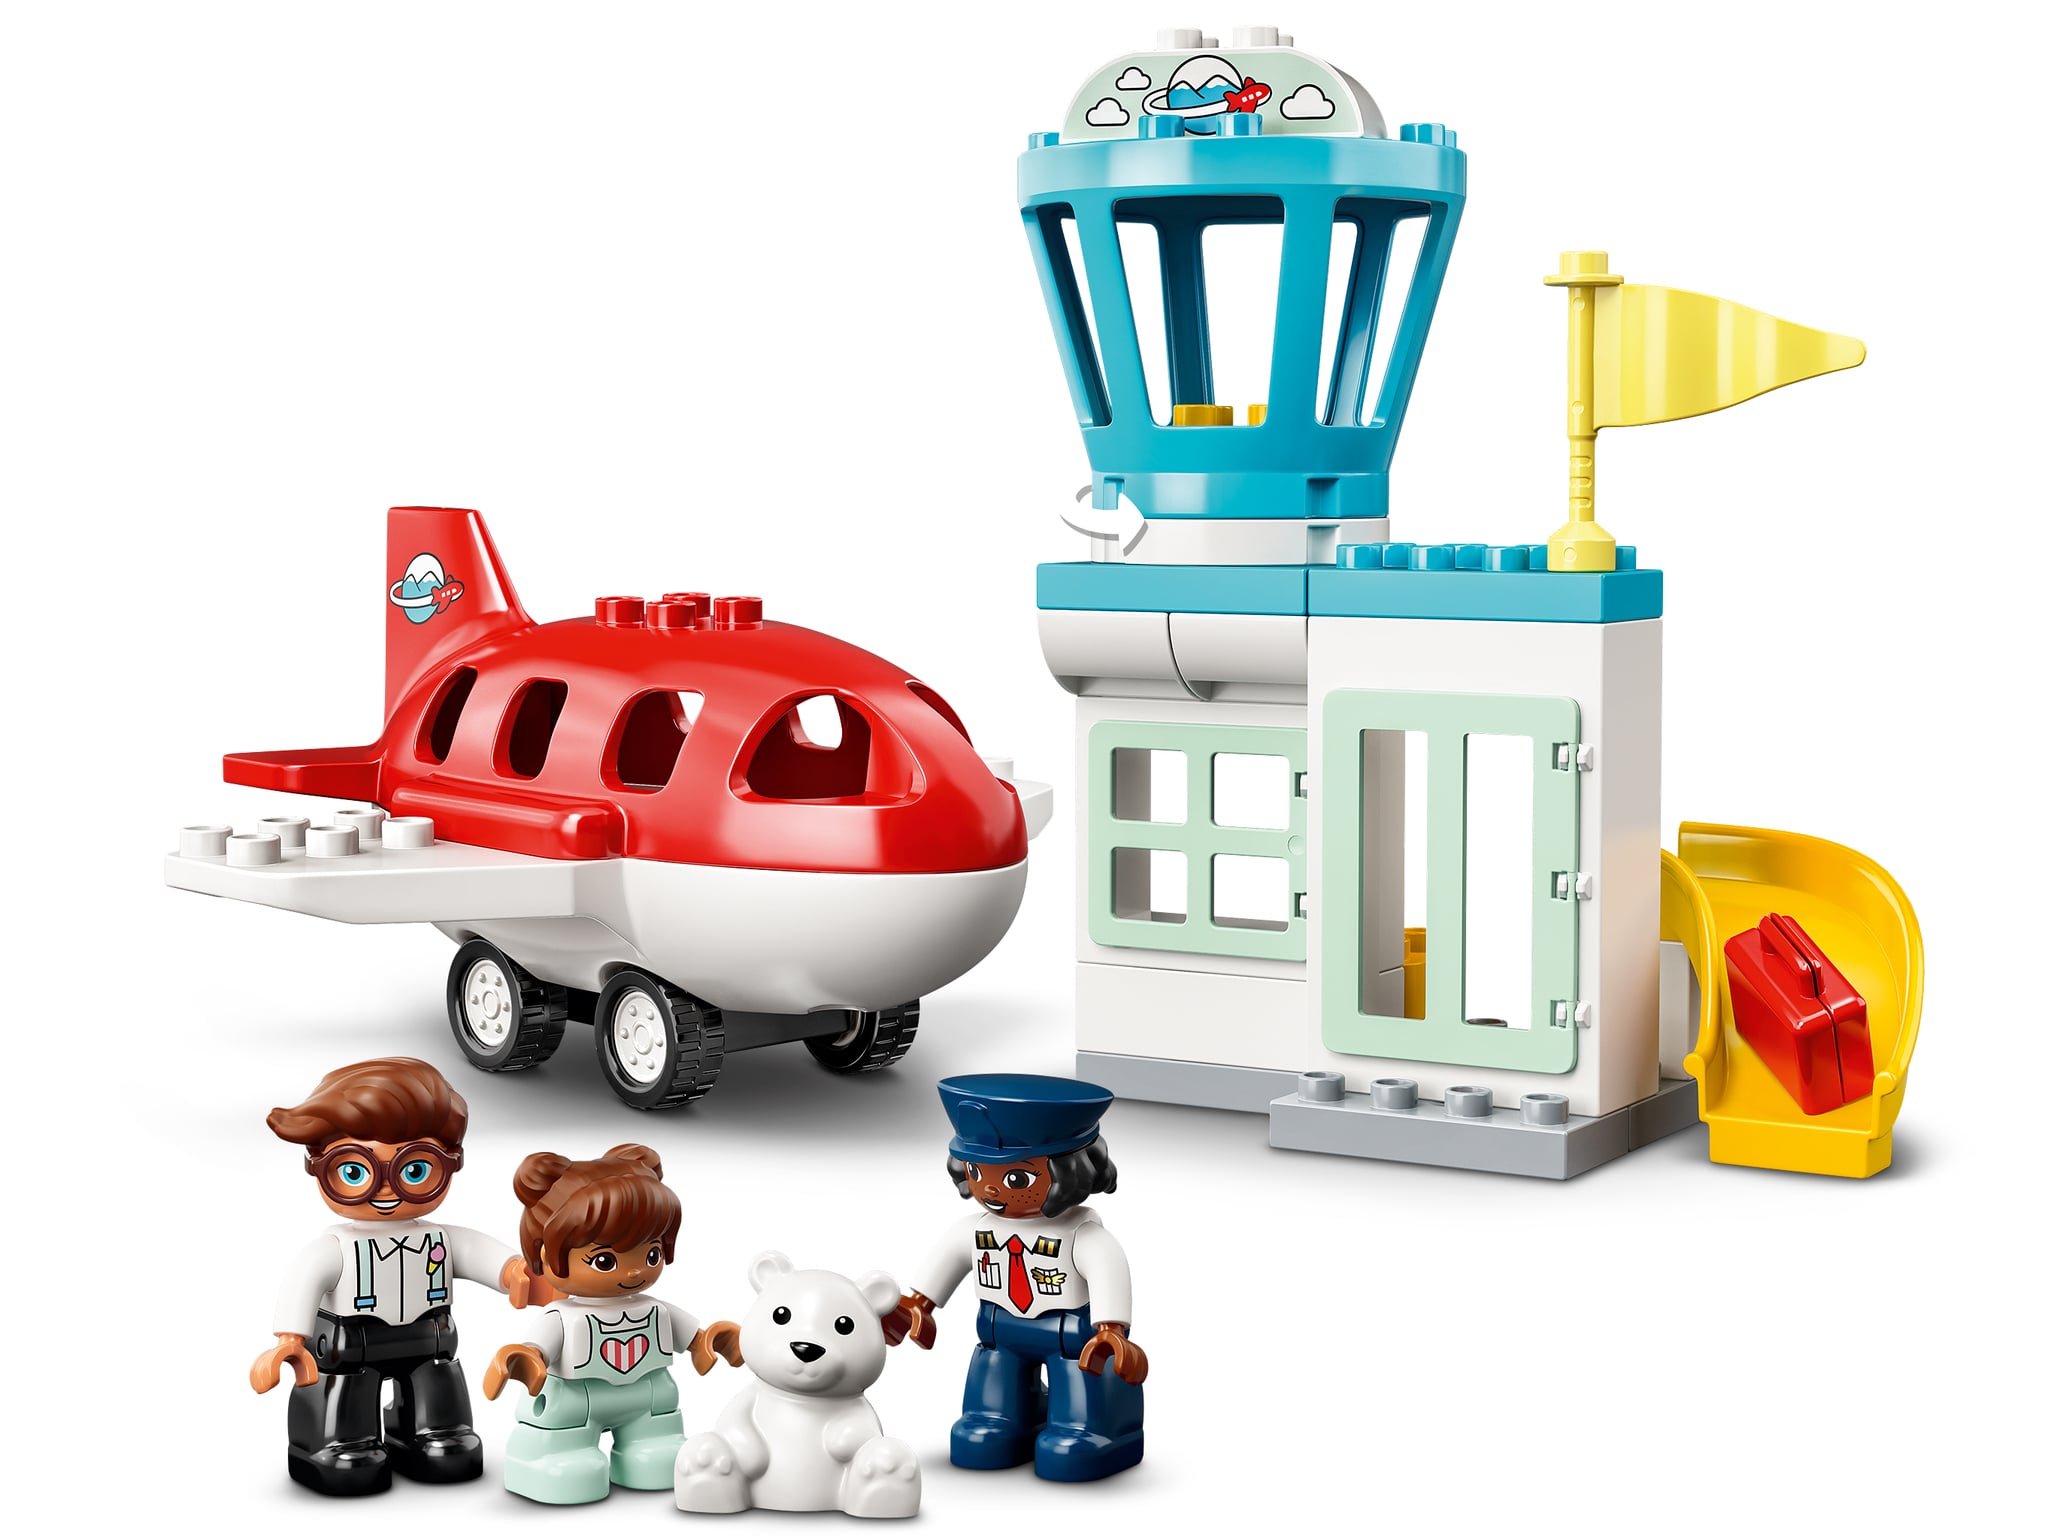 Lego Duplo Airplane & Airport Set | The 33 Lego Sets That Make Great For Toddlers With Developing Motor Skills | Family Photo 14